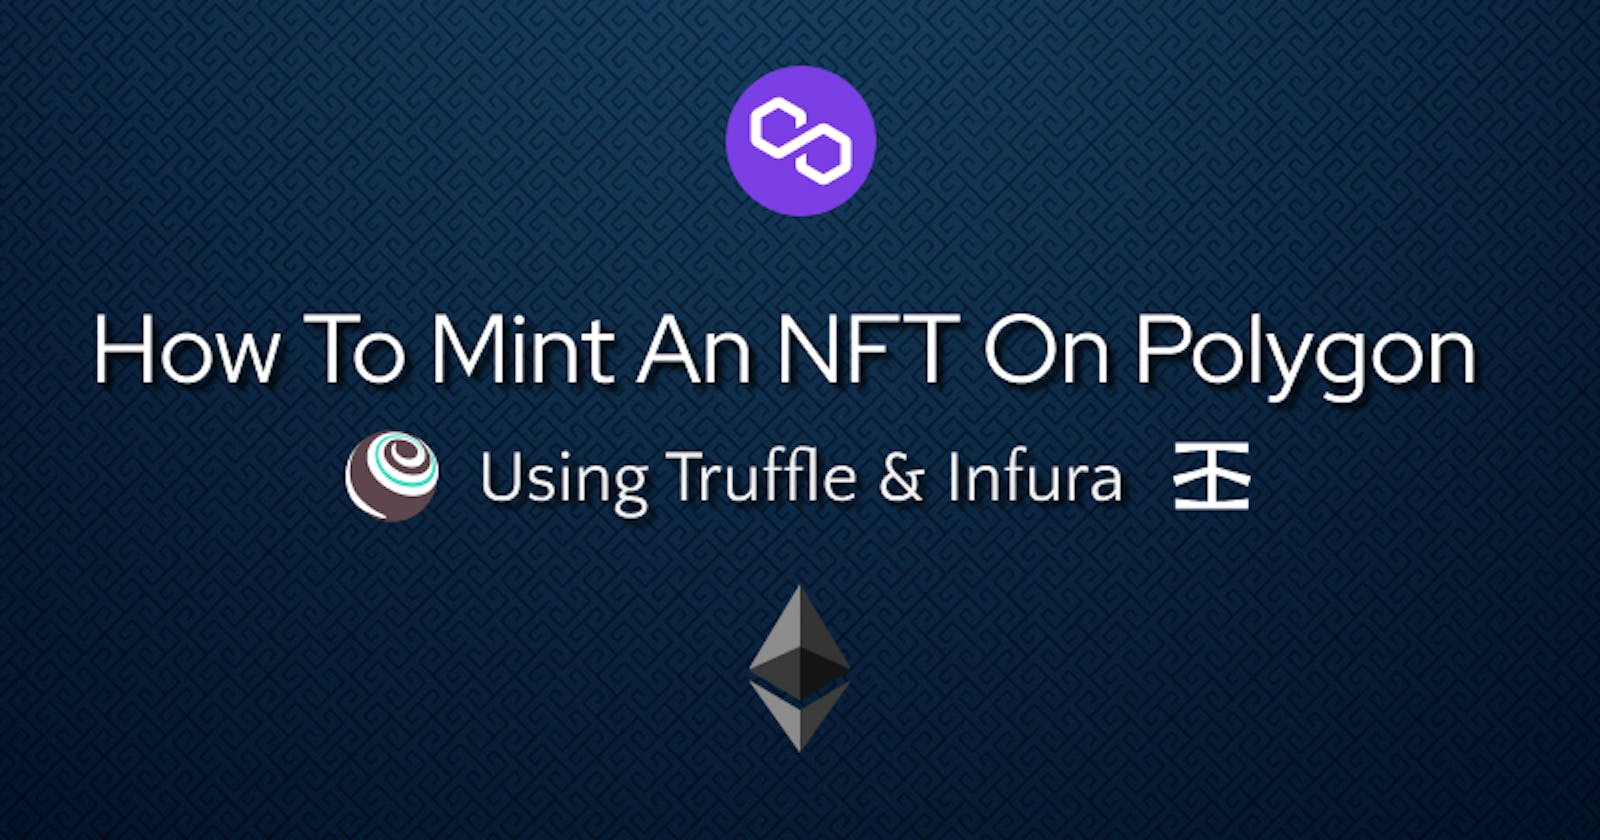 How to Mint an NFT on Polygon